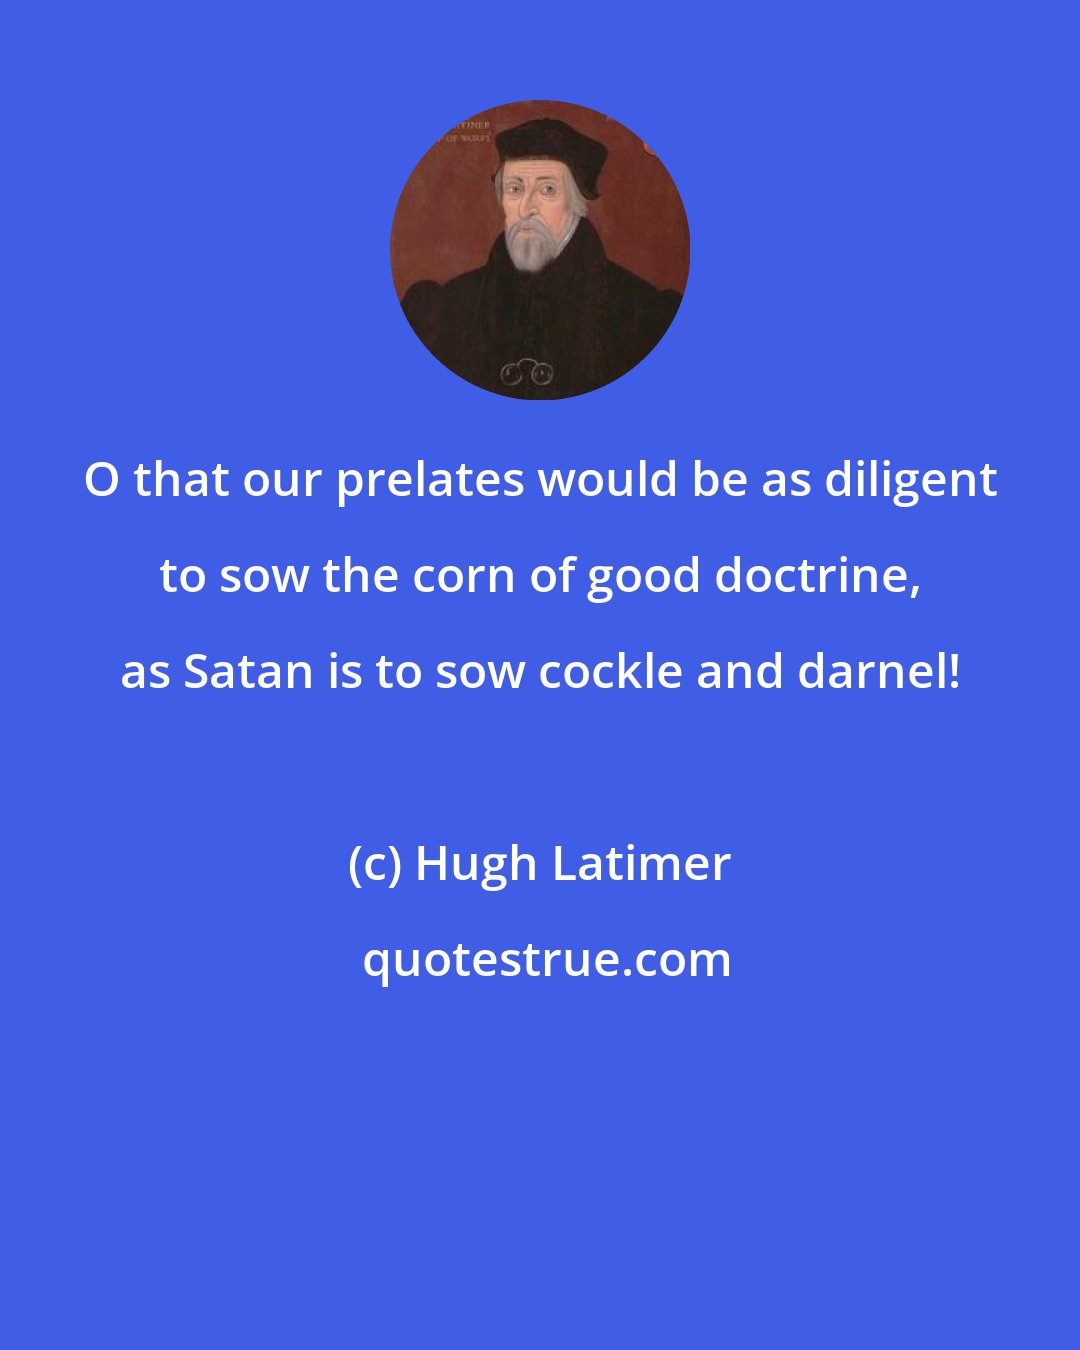 Hugh Latimer: O that our prelates would be as diligent to sow the corn of good doctrine, as Satan is to sow cockle and darnel!